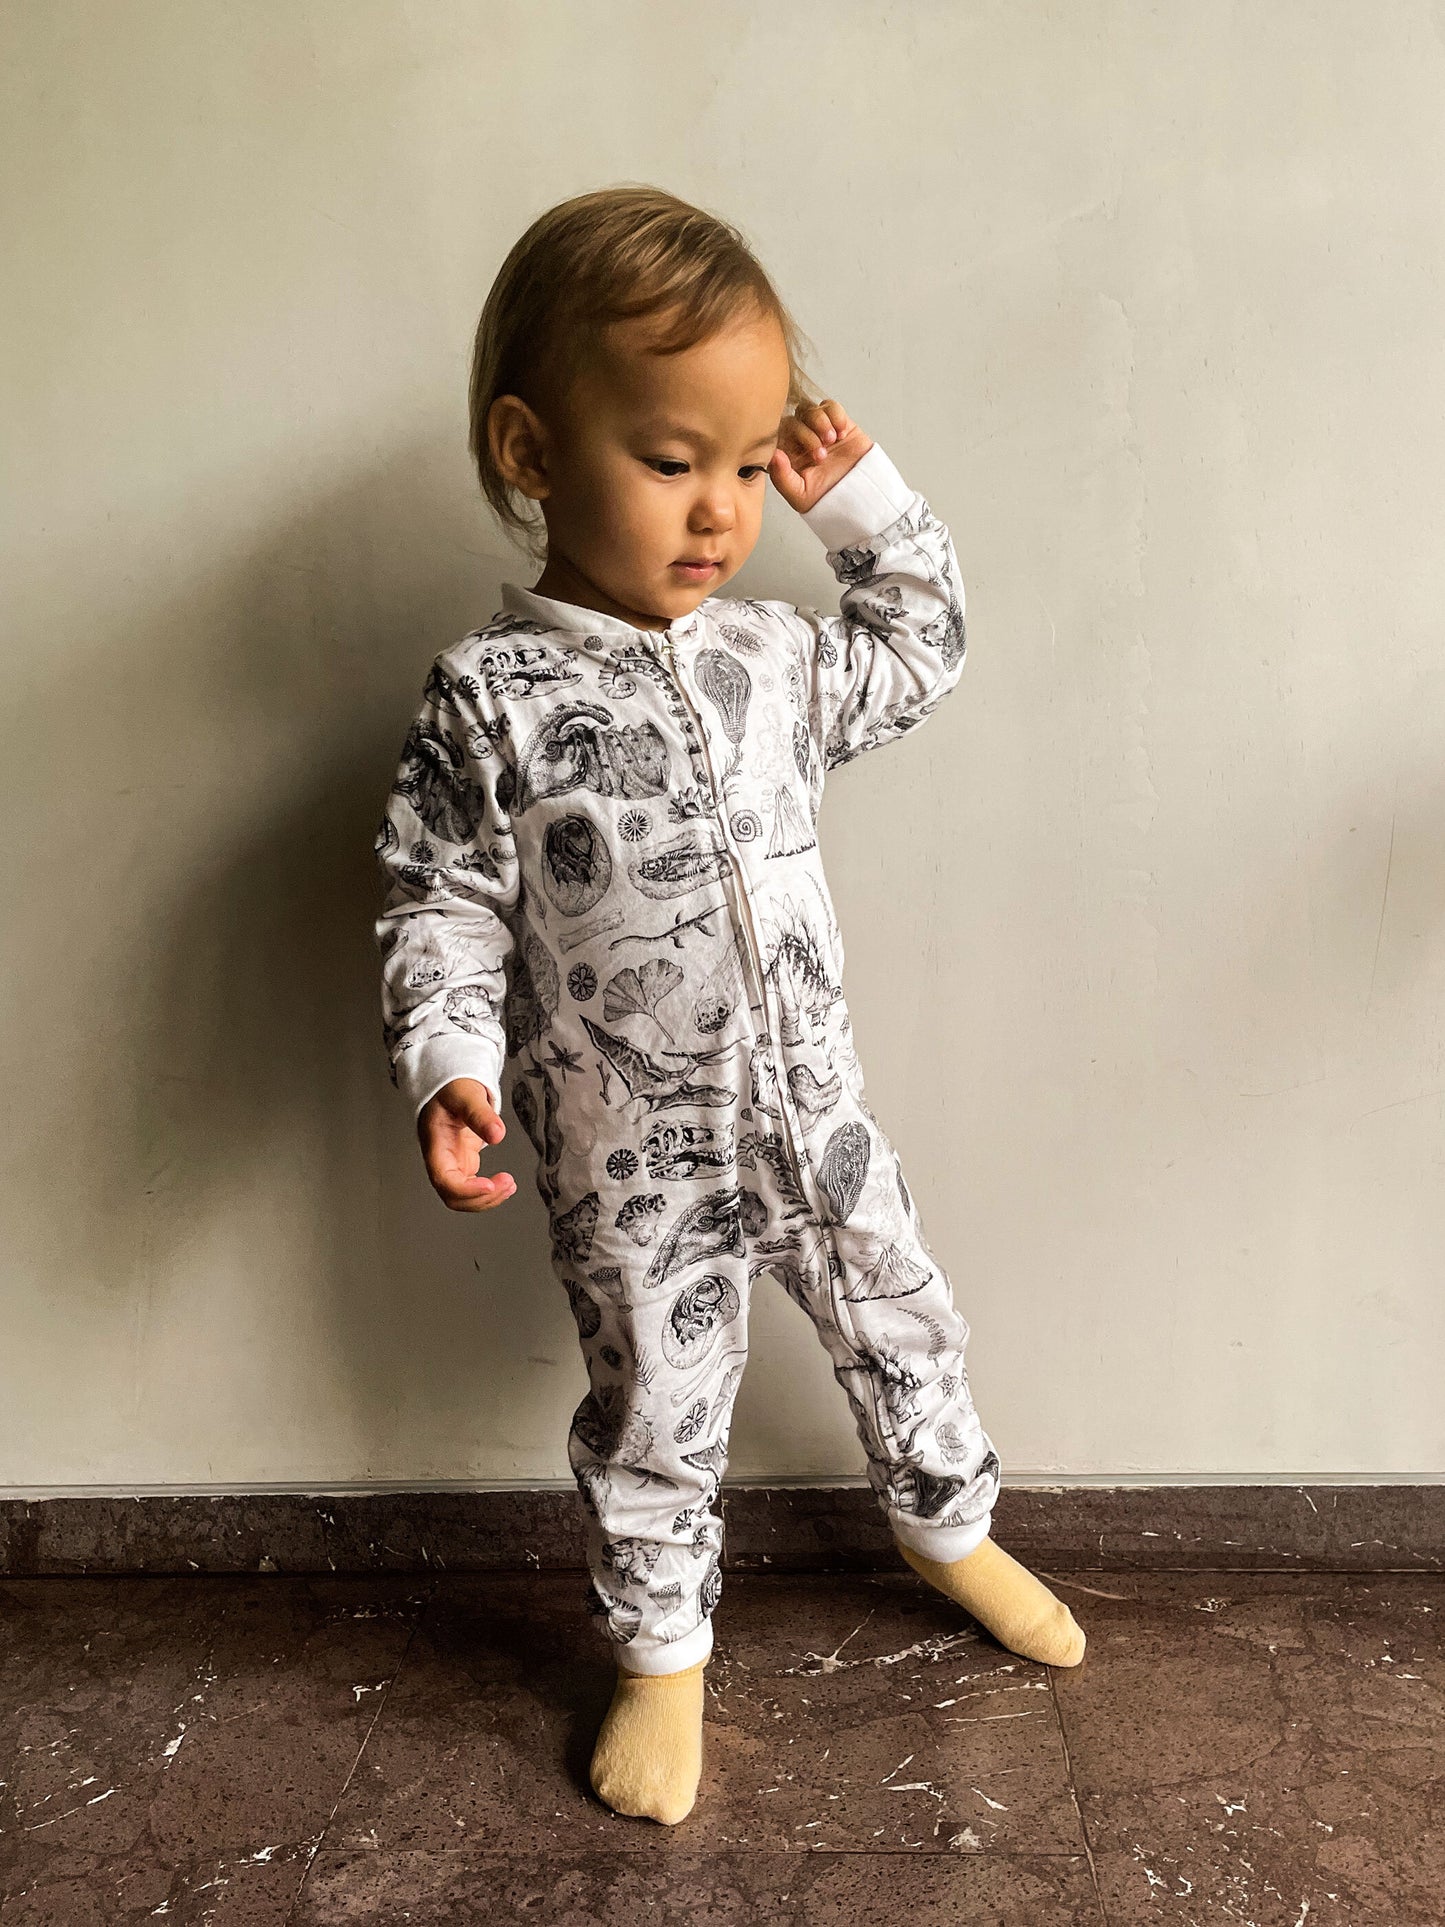 Babies or Explorers to be will sleep soundly in this lightweight soft cotton pyjama. Are you ready for prehistoric cuddles with your little one? This soft and comfy Onesie features prehistoric illustrations by Tattoo-Artist Suflanda!